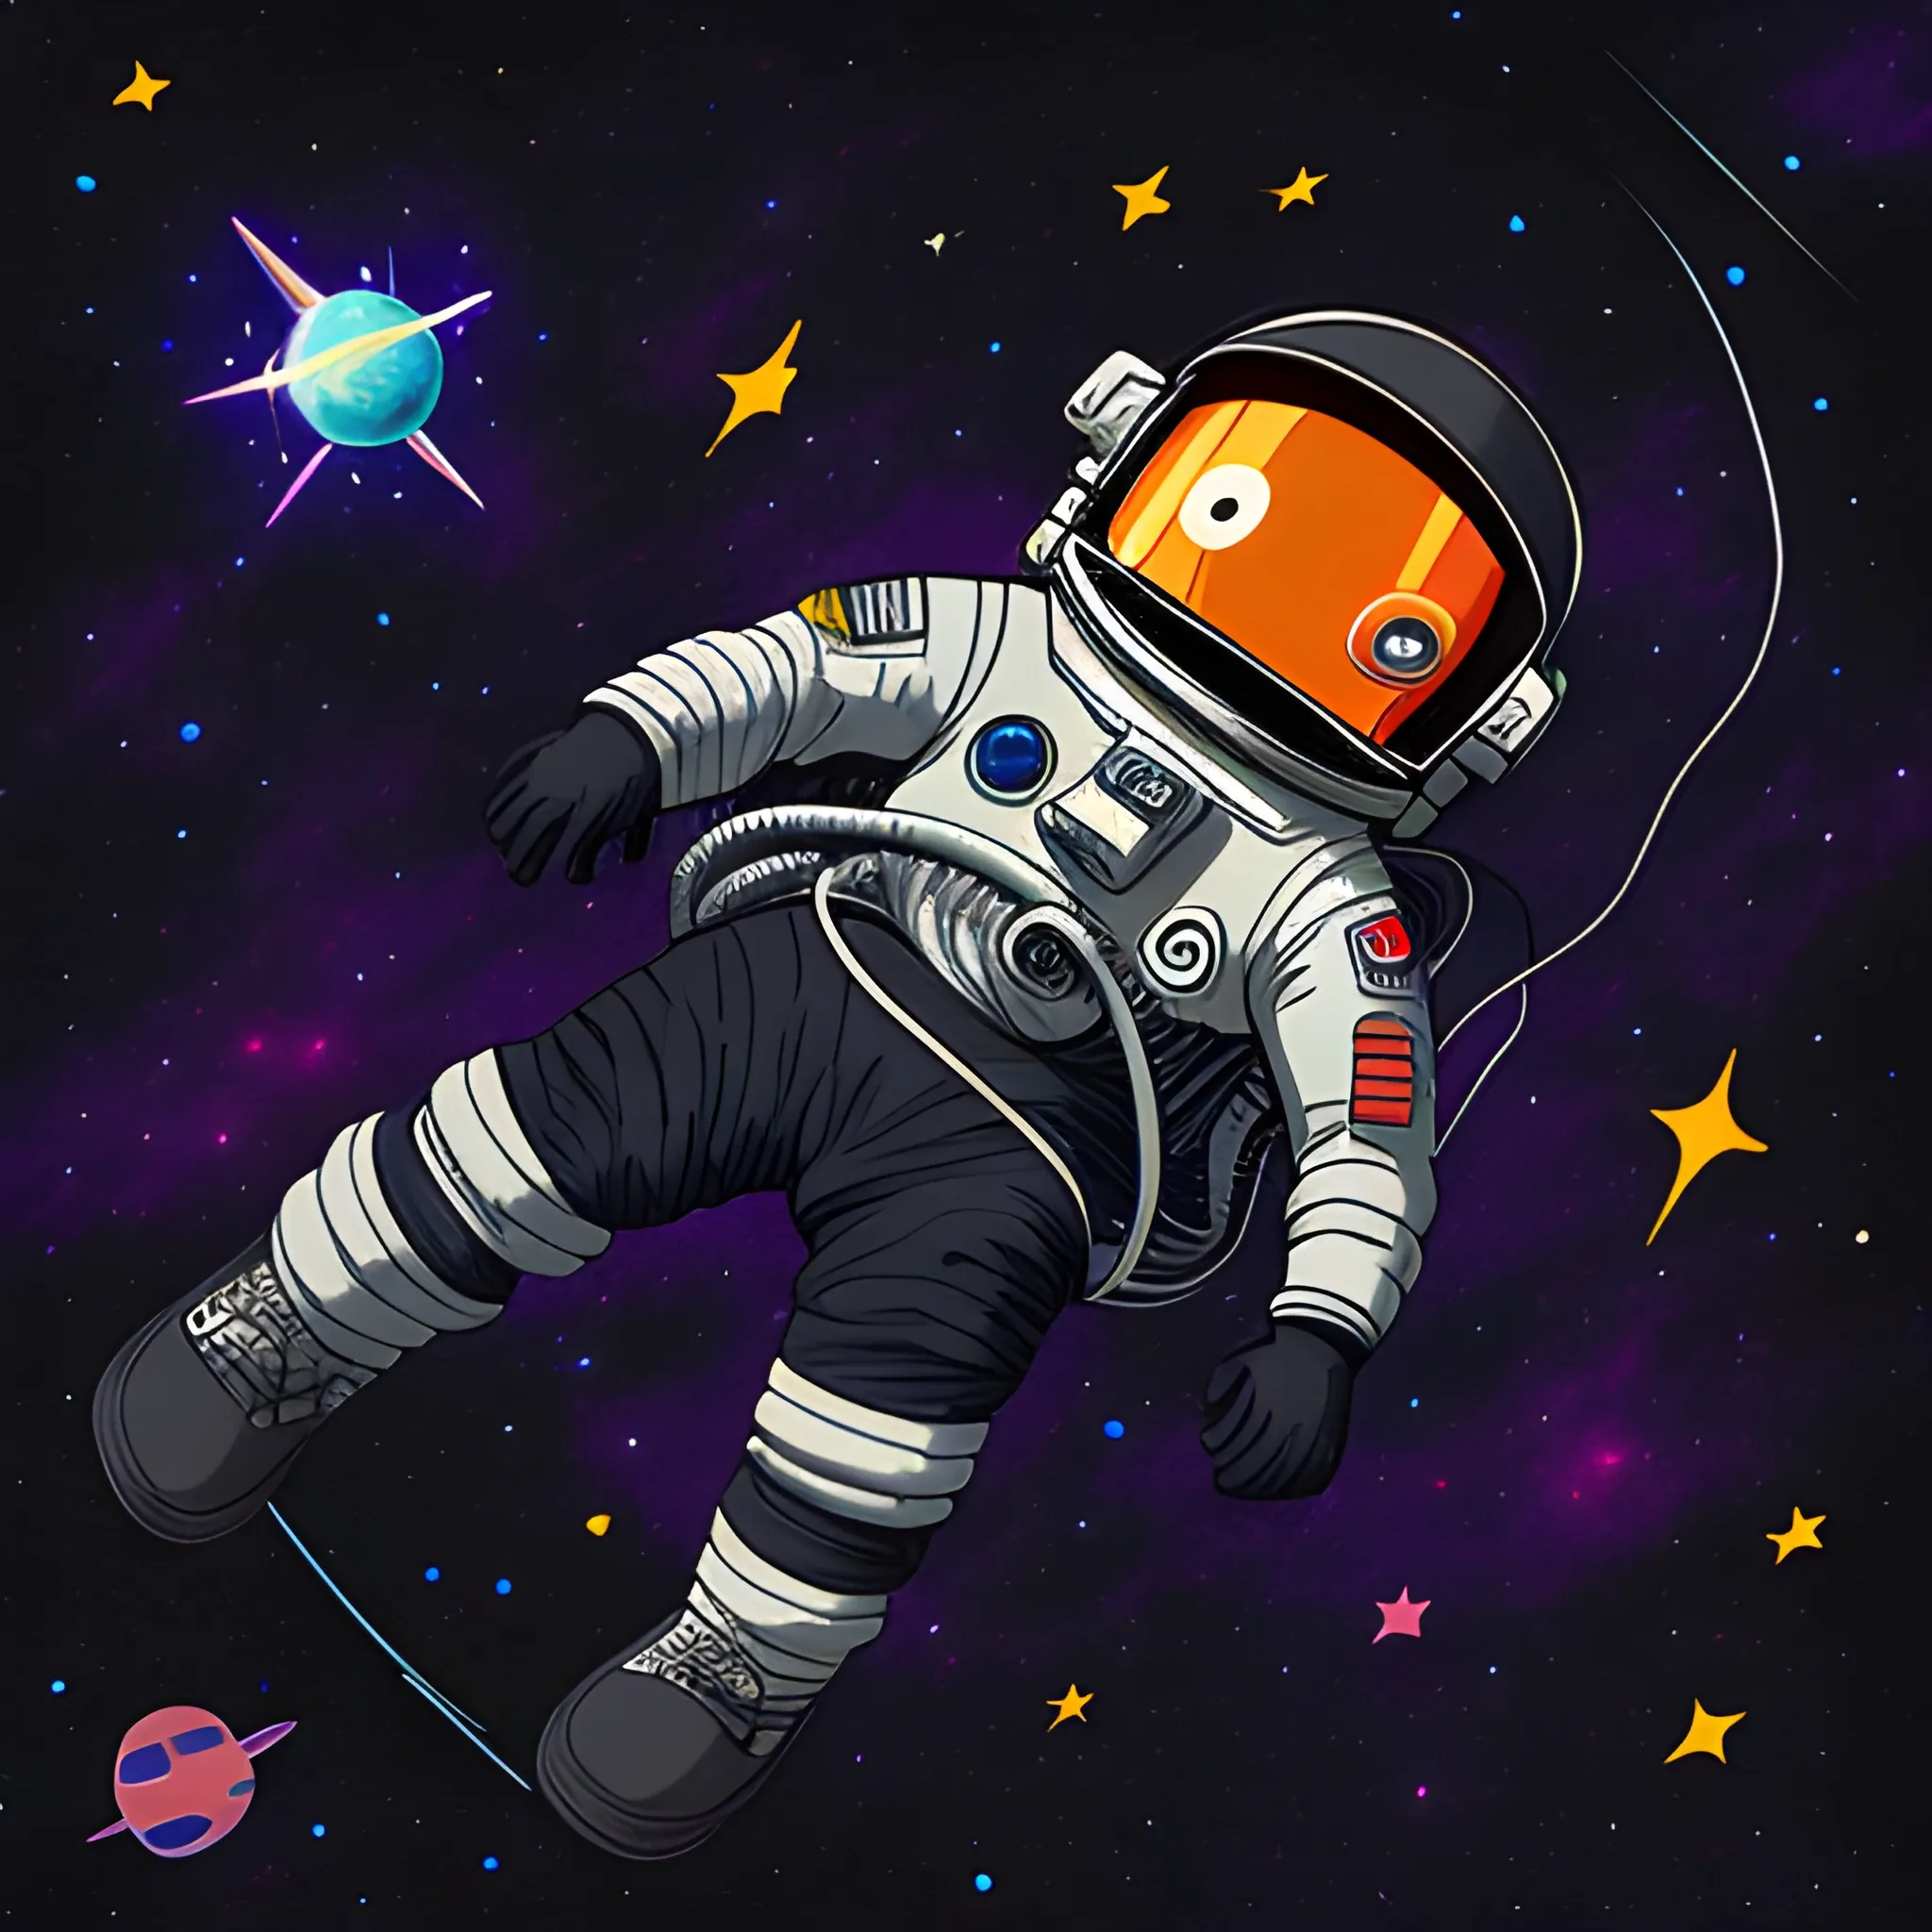 astronaut with astro suit totally black, tripping in void with a fully star space void, Cartoon